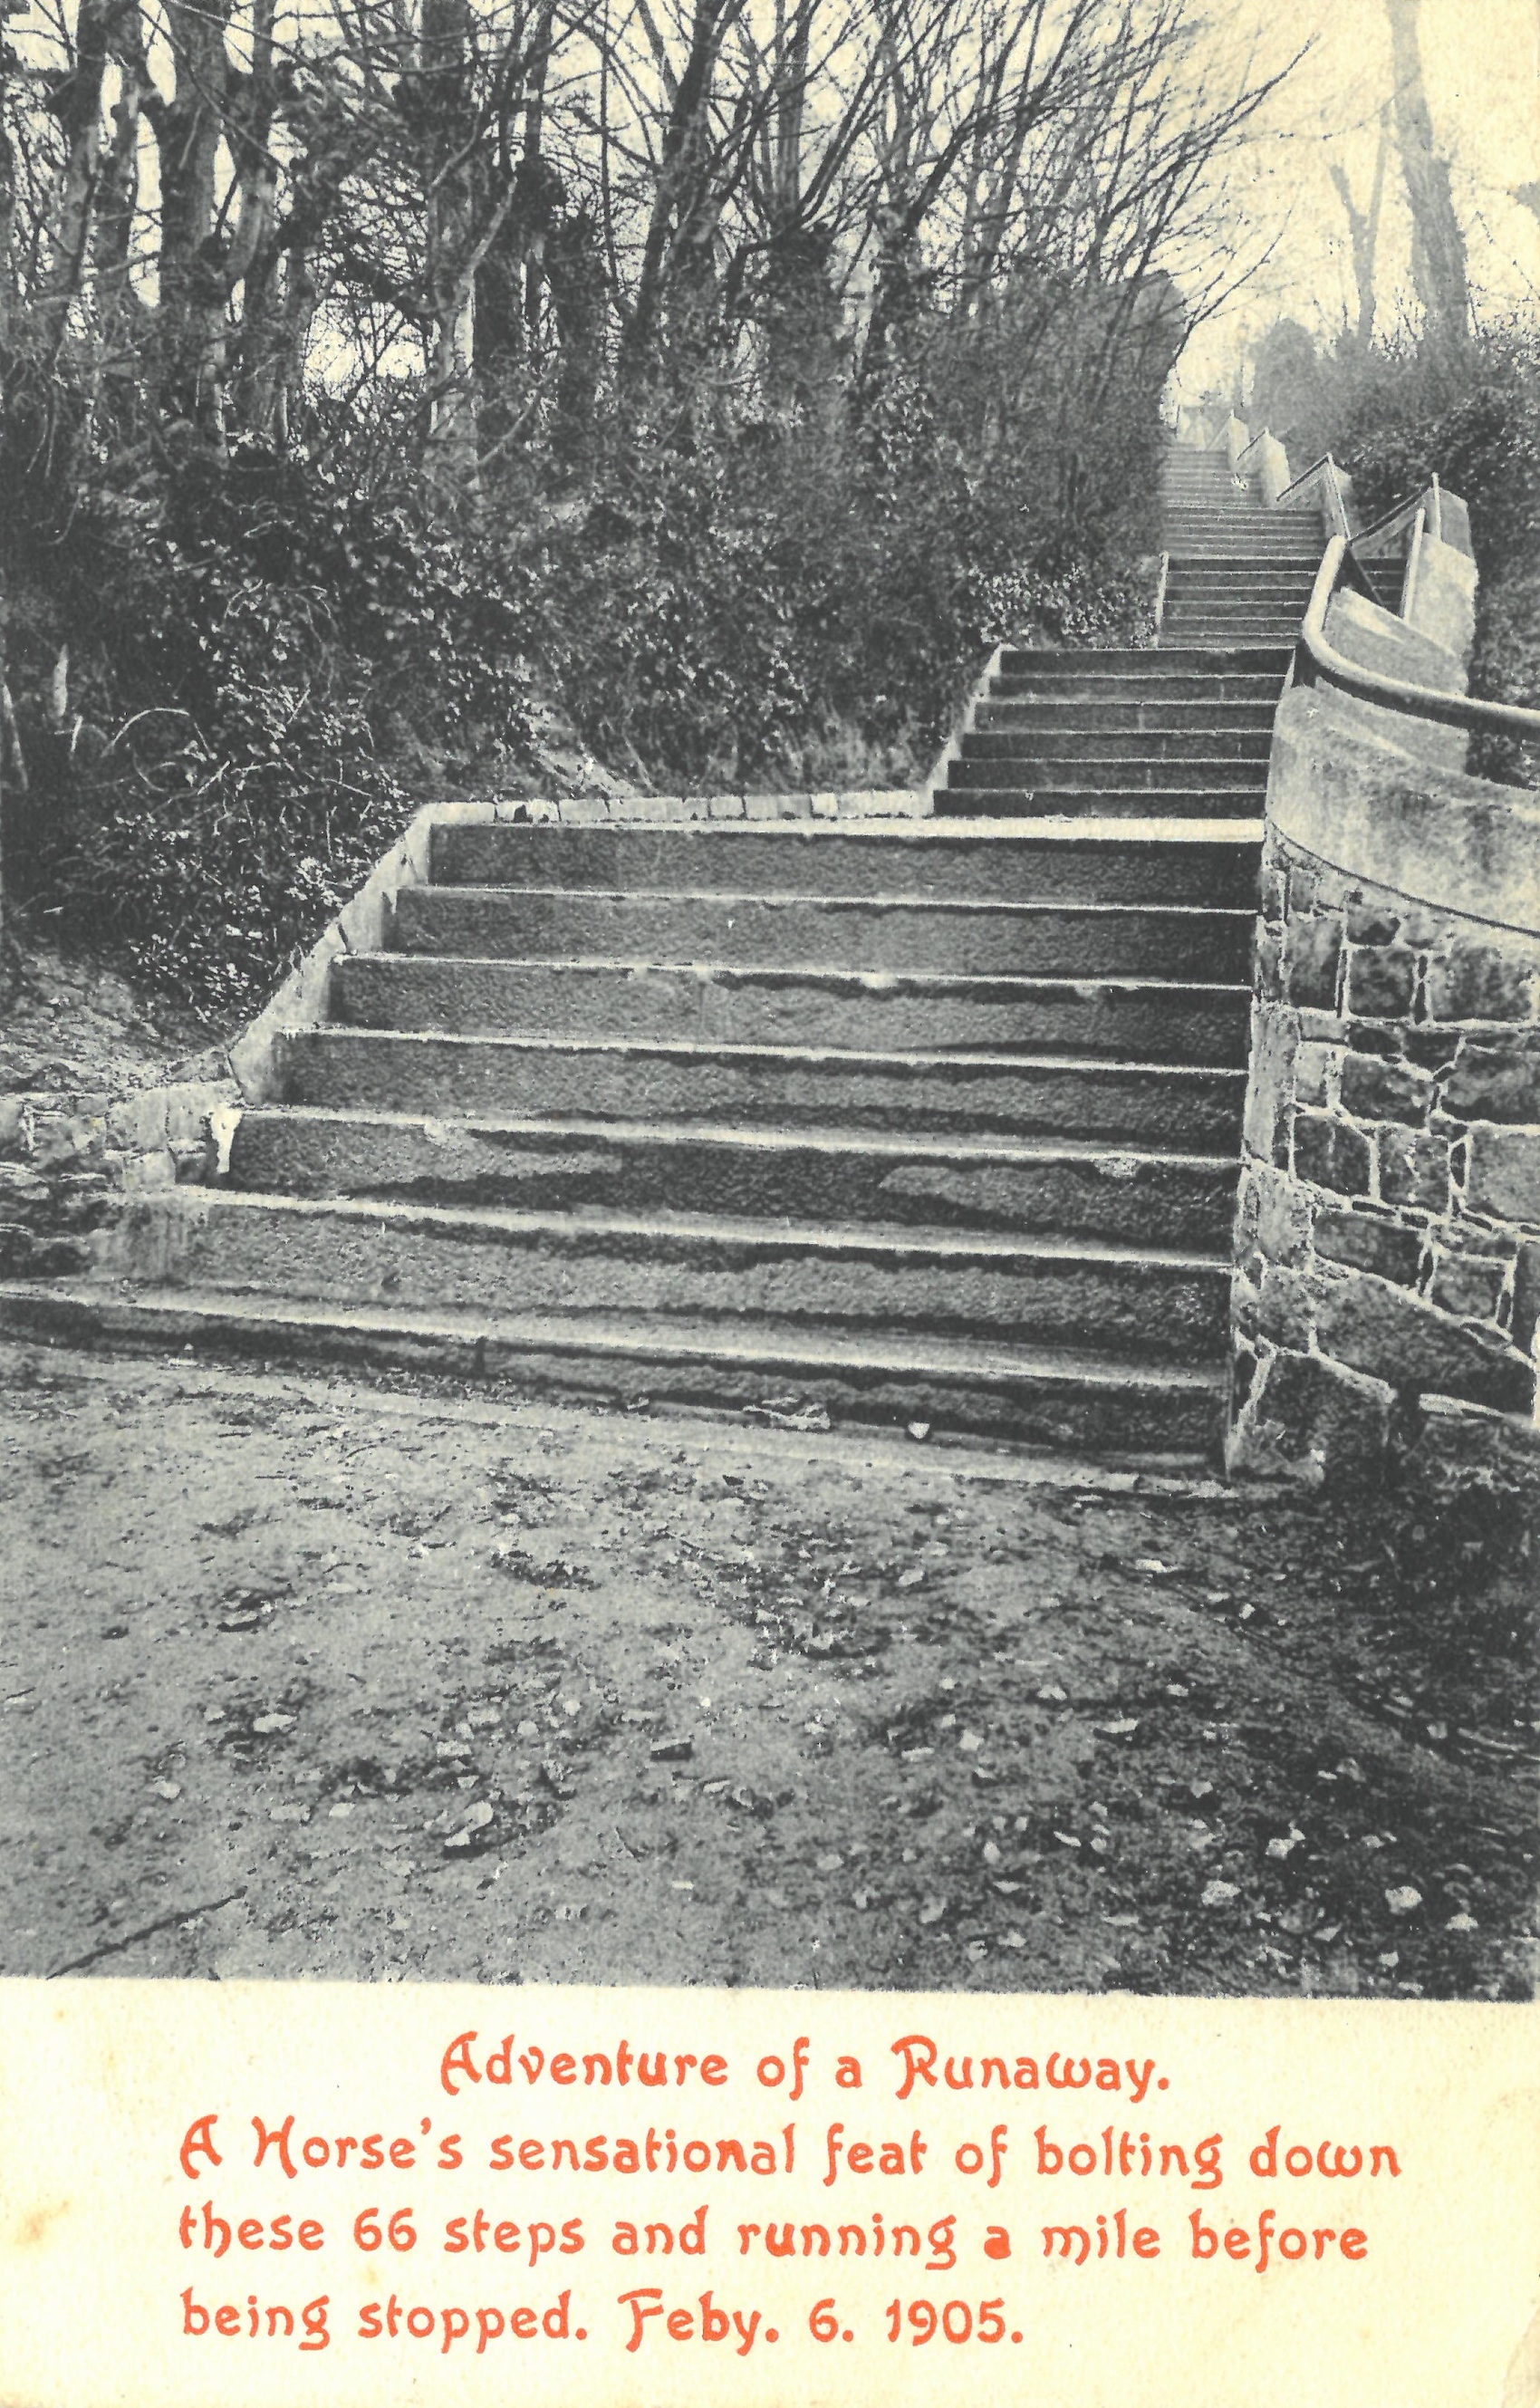 Postcard_looking_up_the_stairs_from_Queen_s_Road_to_New_St_John_s_Road_that_the_horse_bolted_down_Jersey_Heritage.jpg